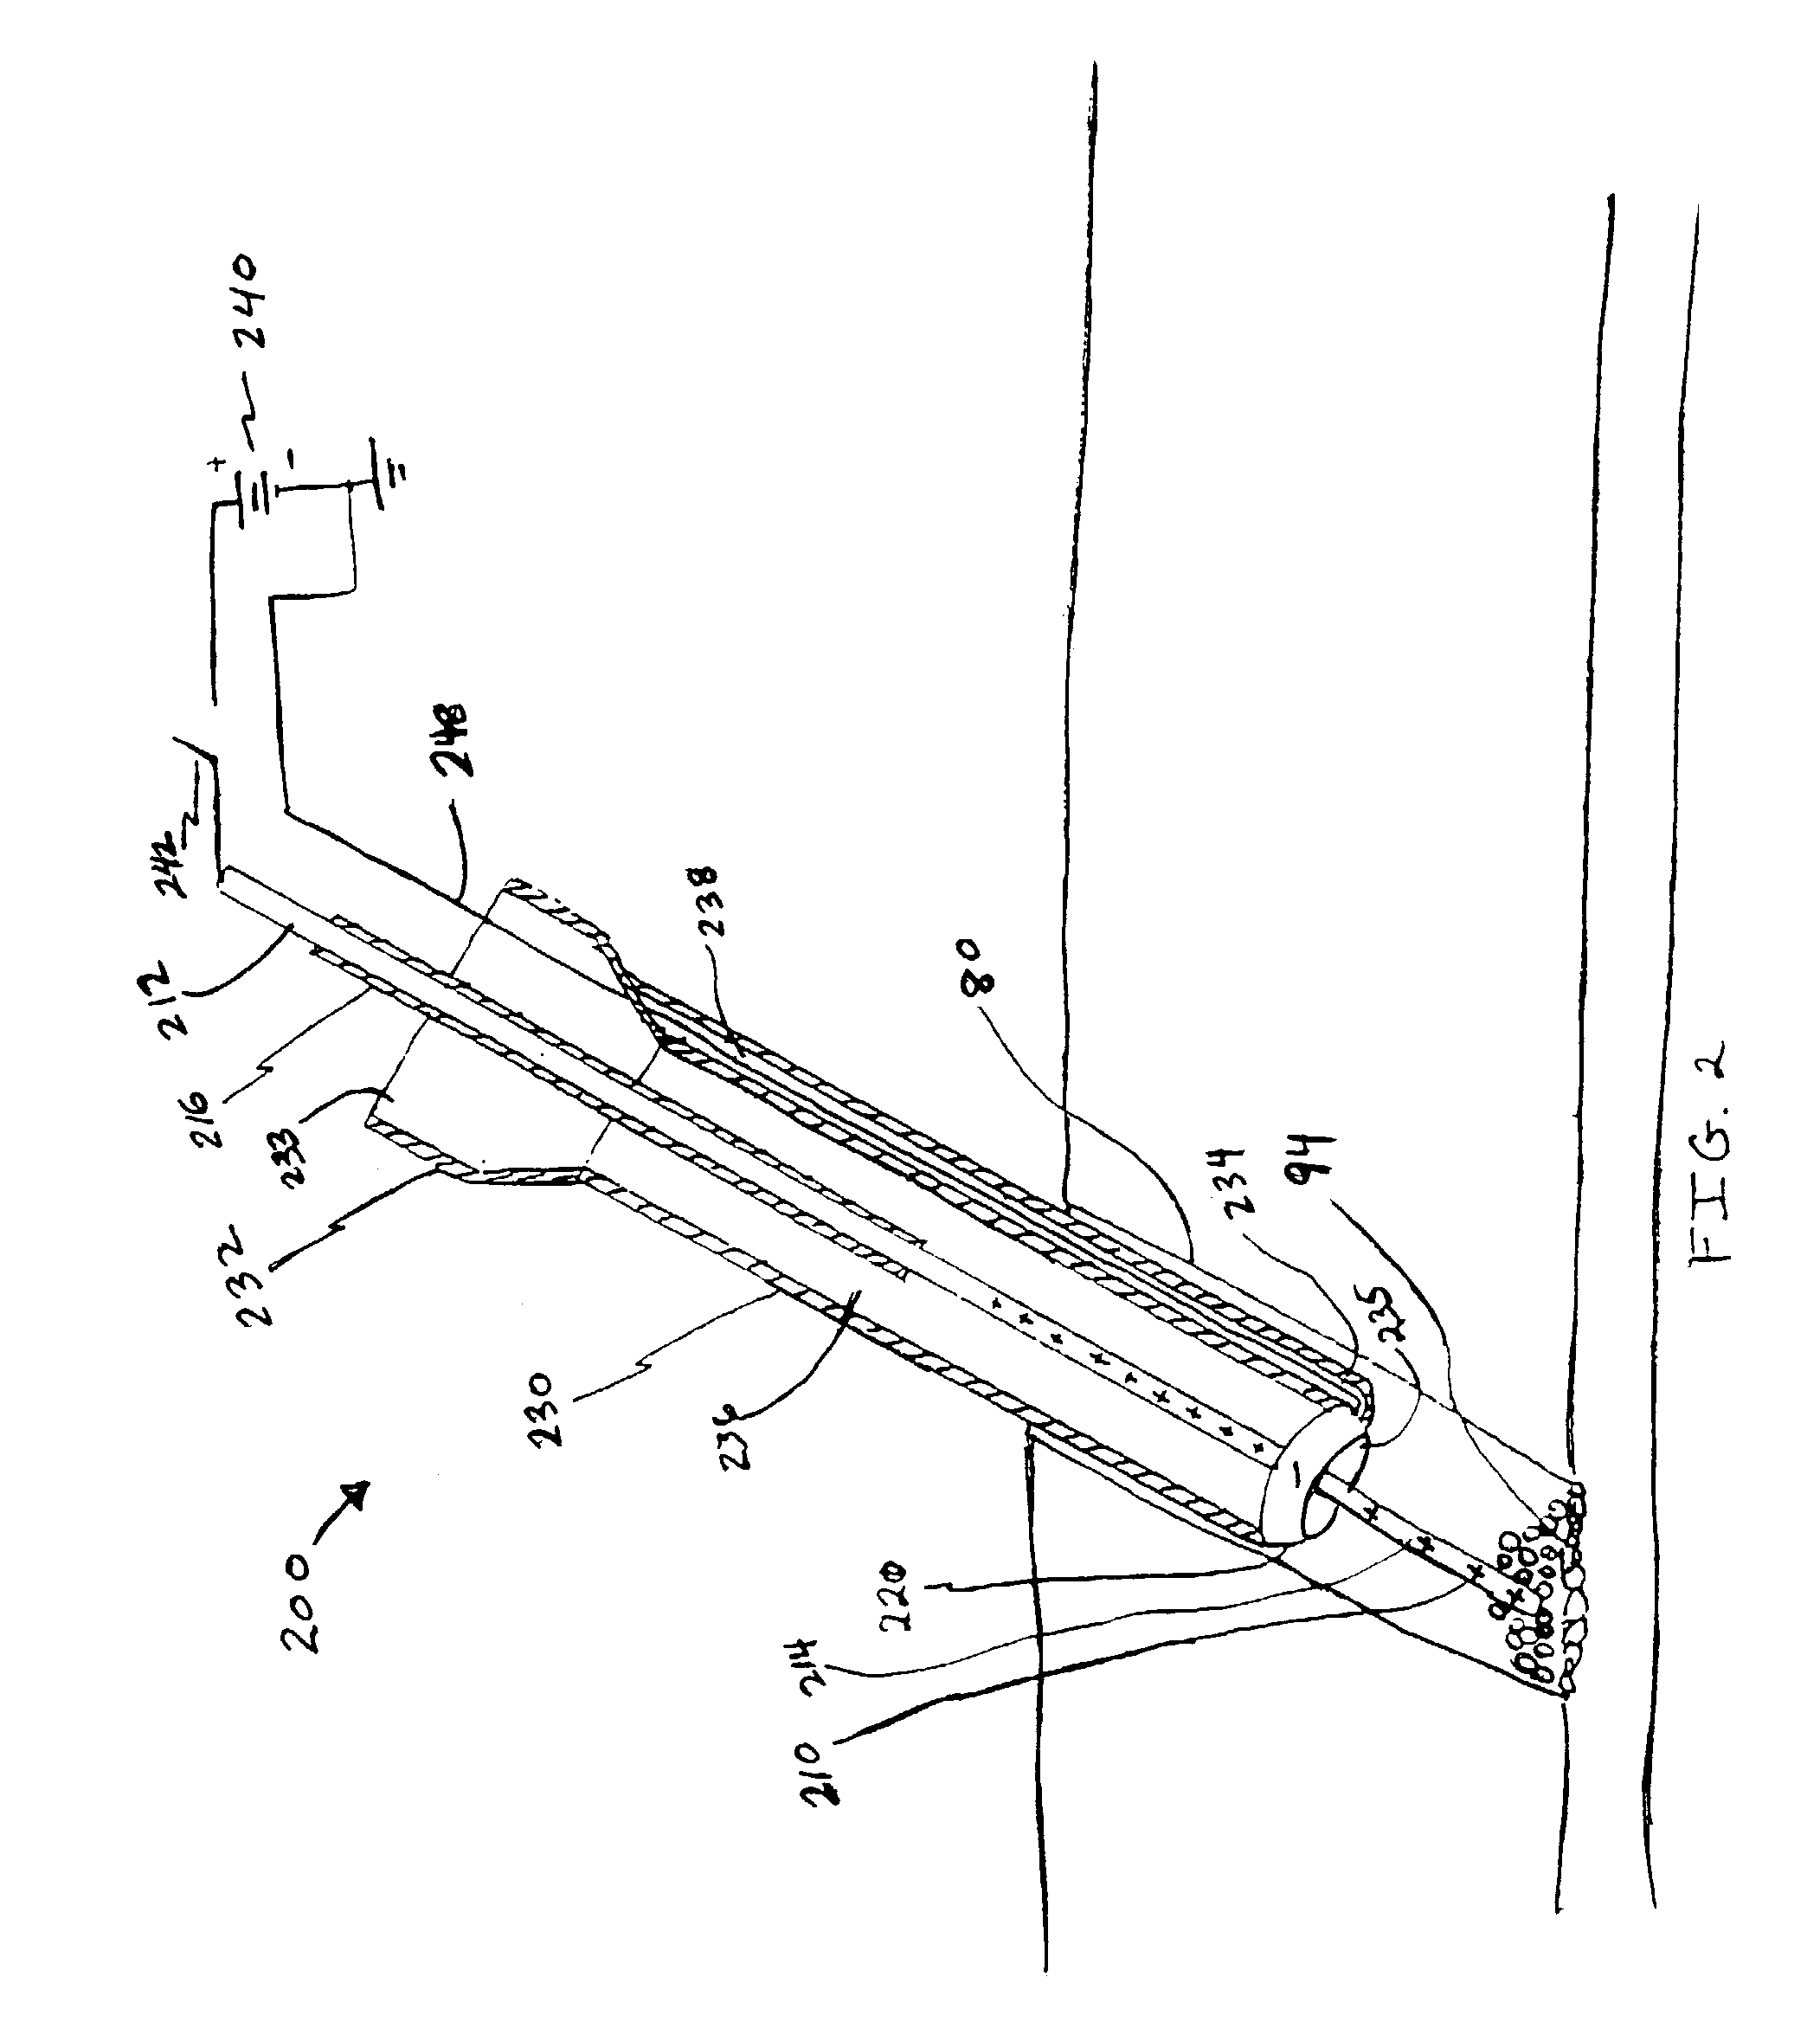 Apparatus and method for electrically induced thrombosis